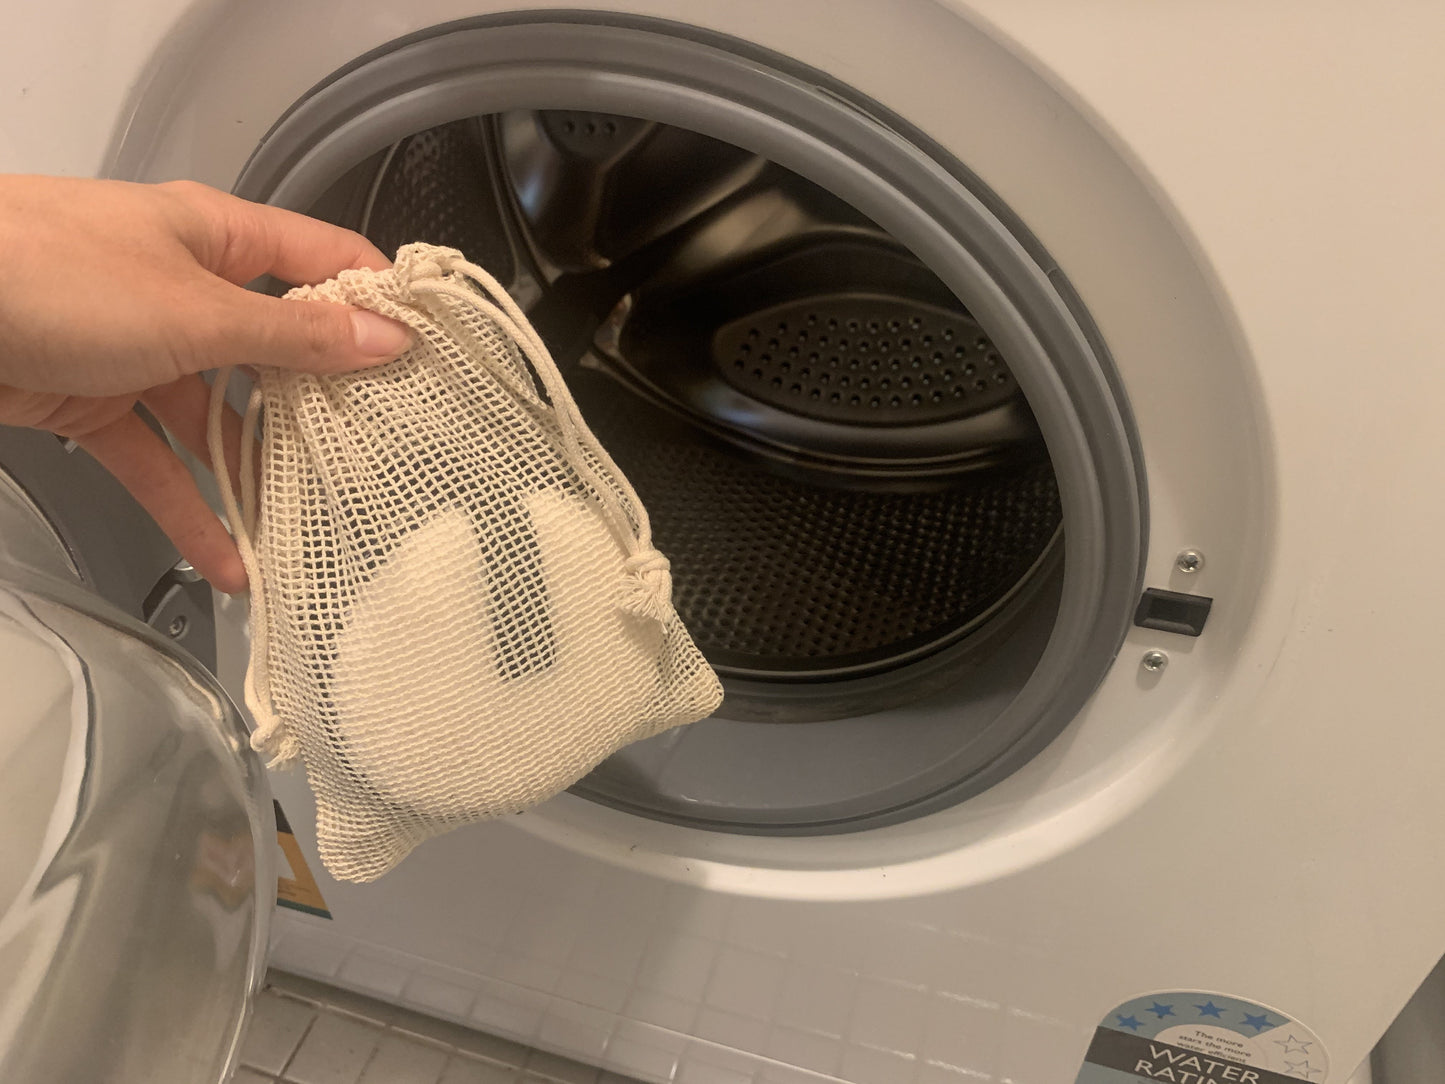 Makeup remover pads in washing machine